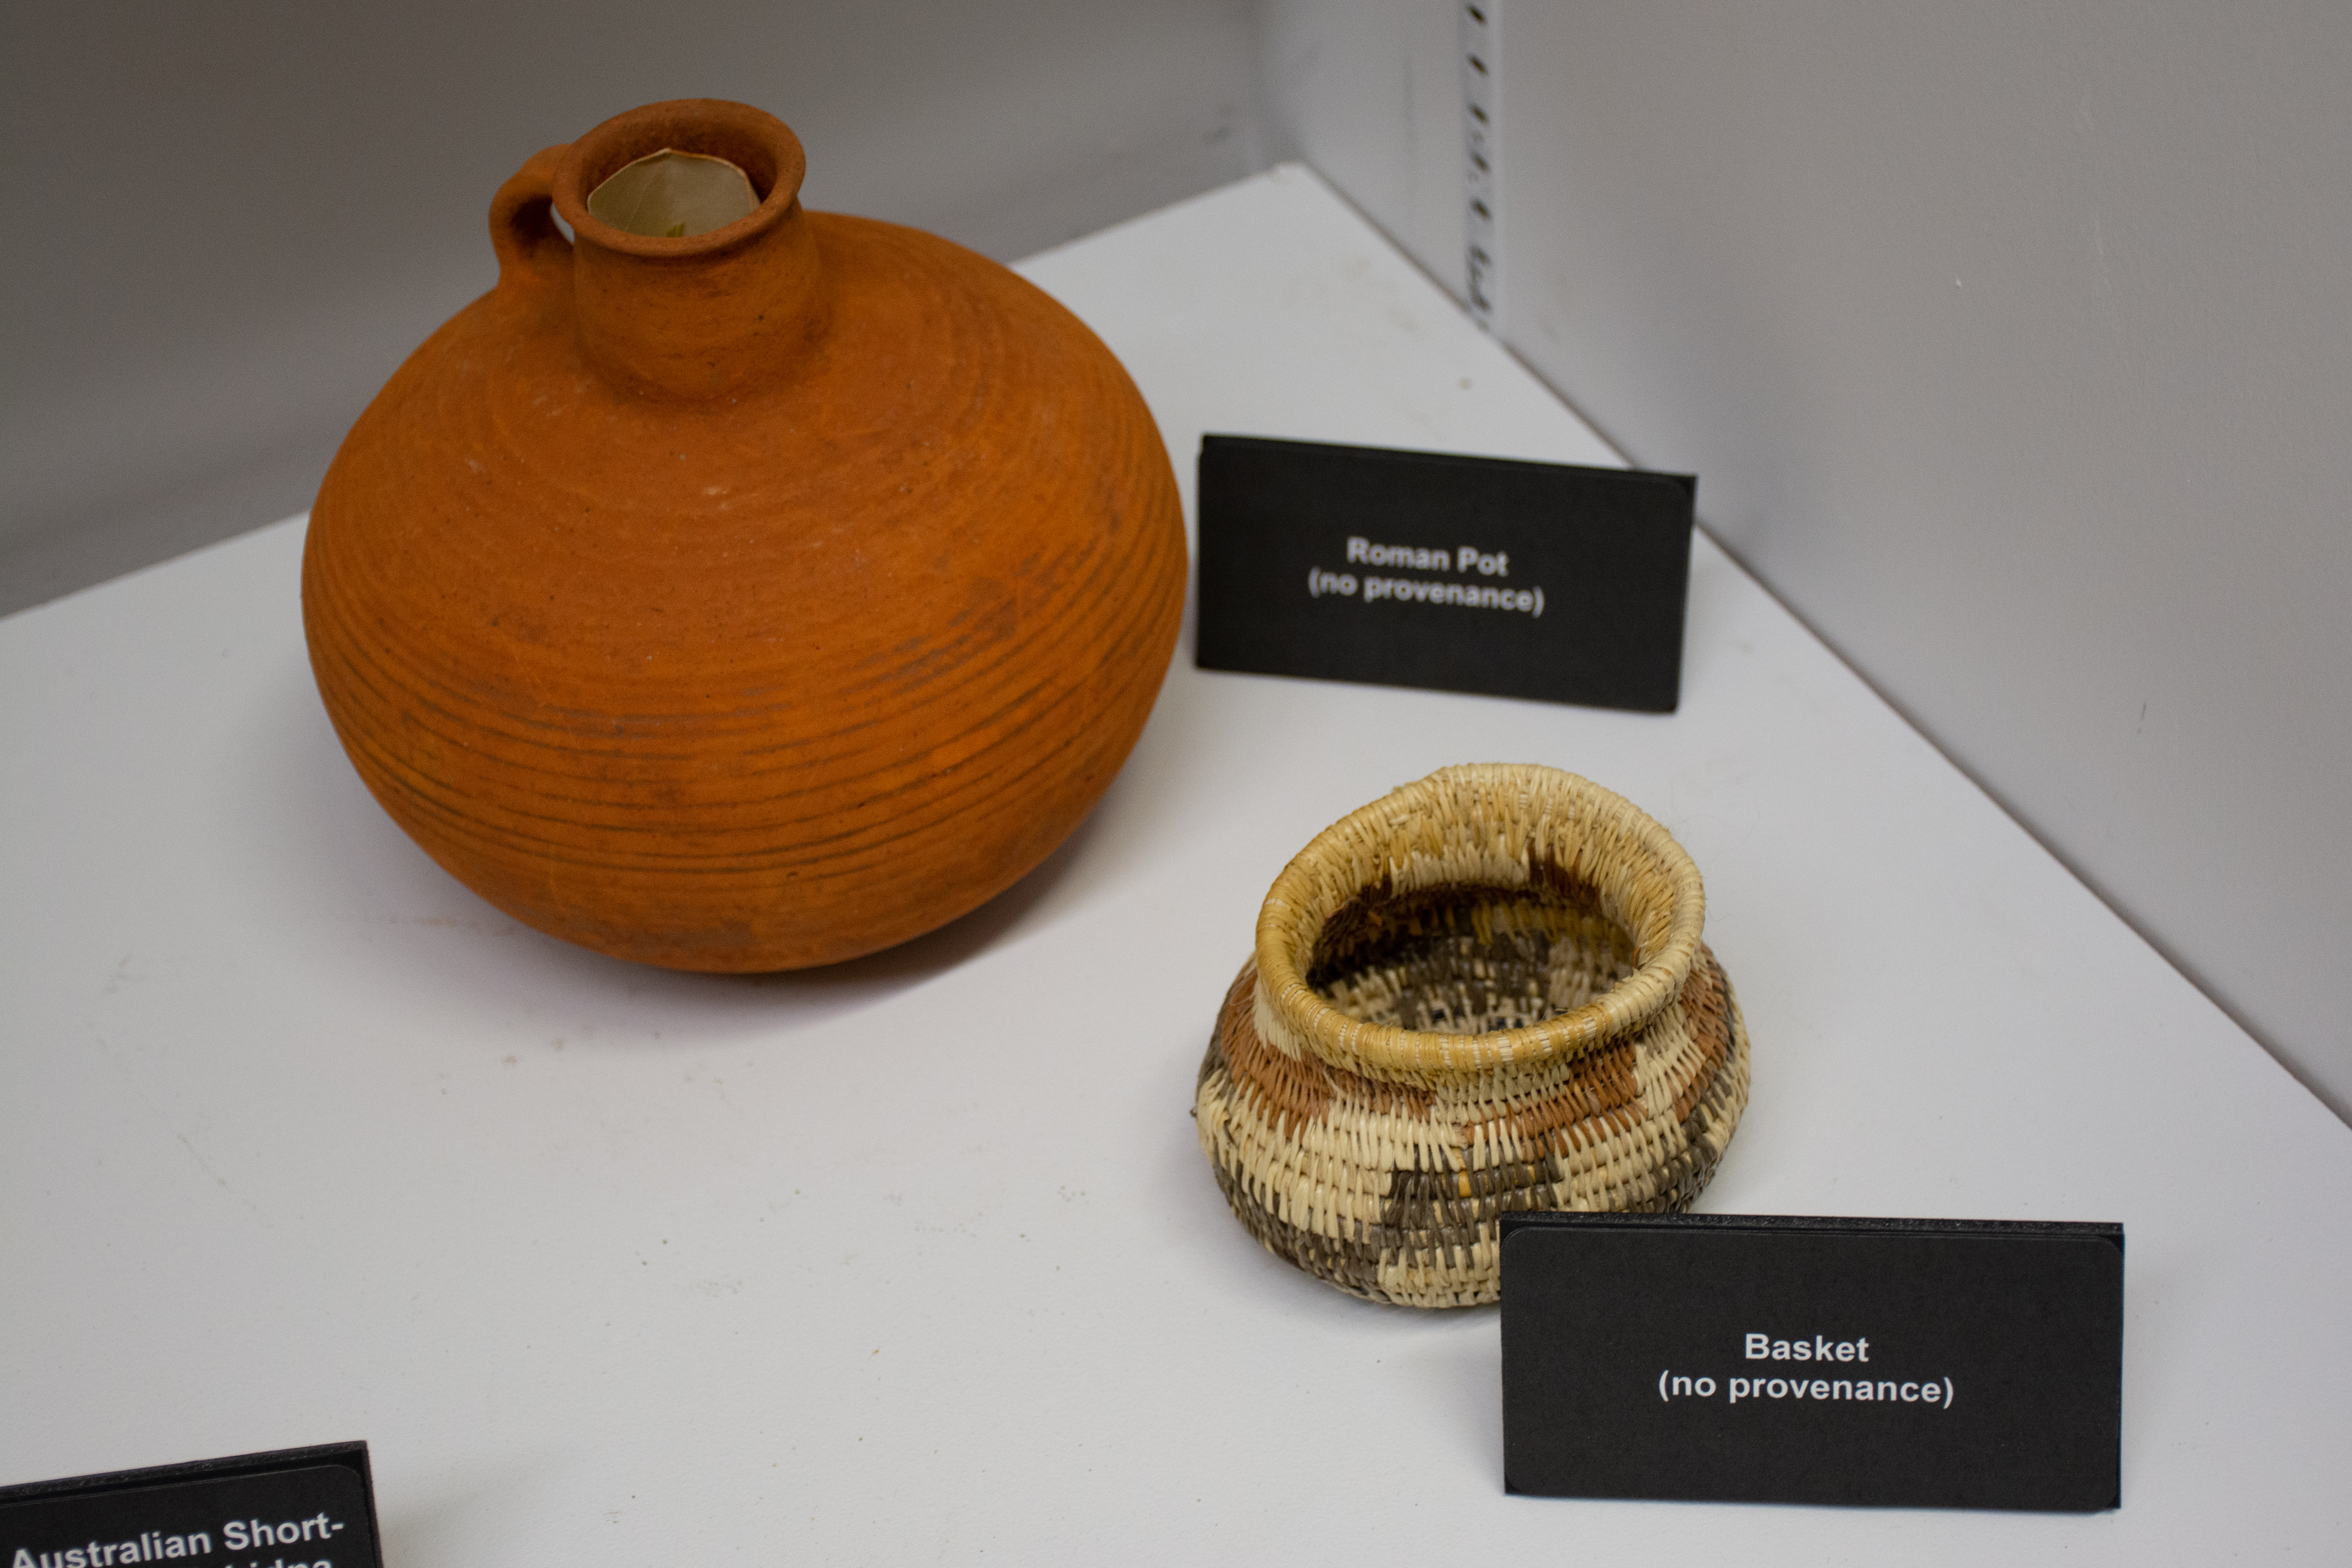 Roman Pot(left) and Basket(right)